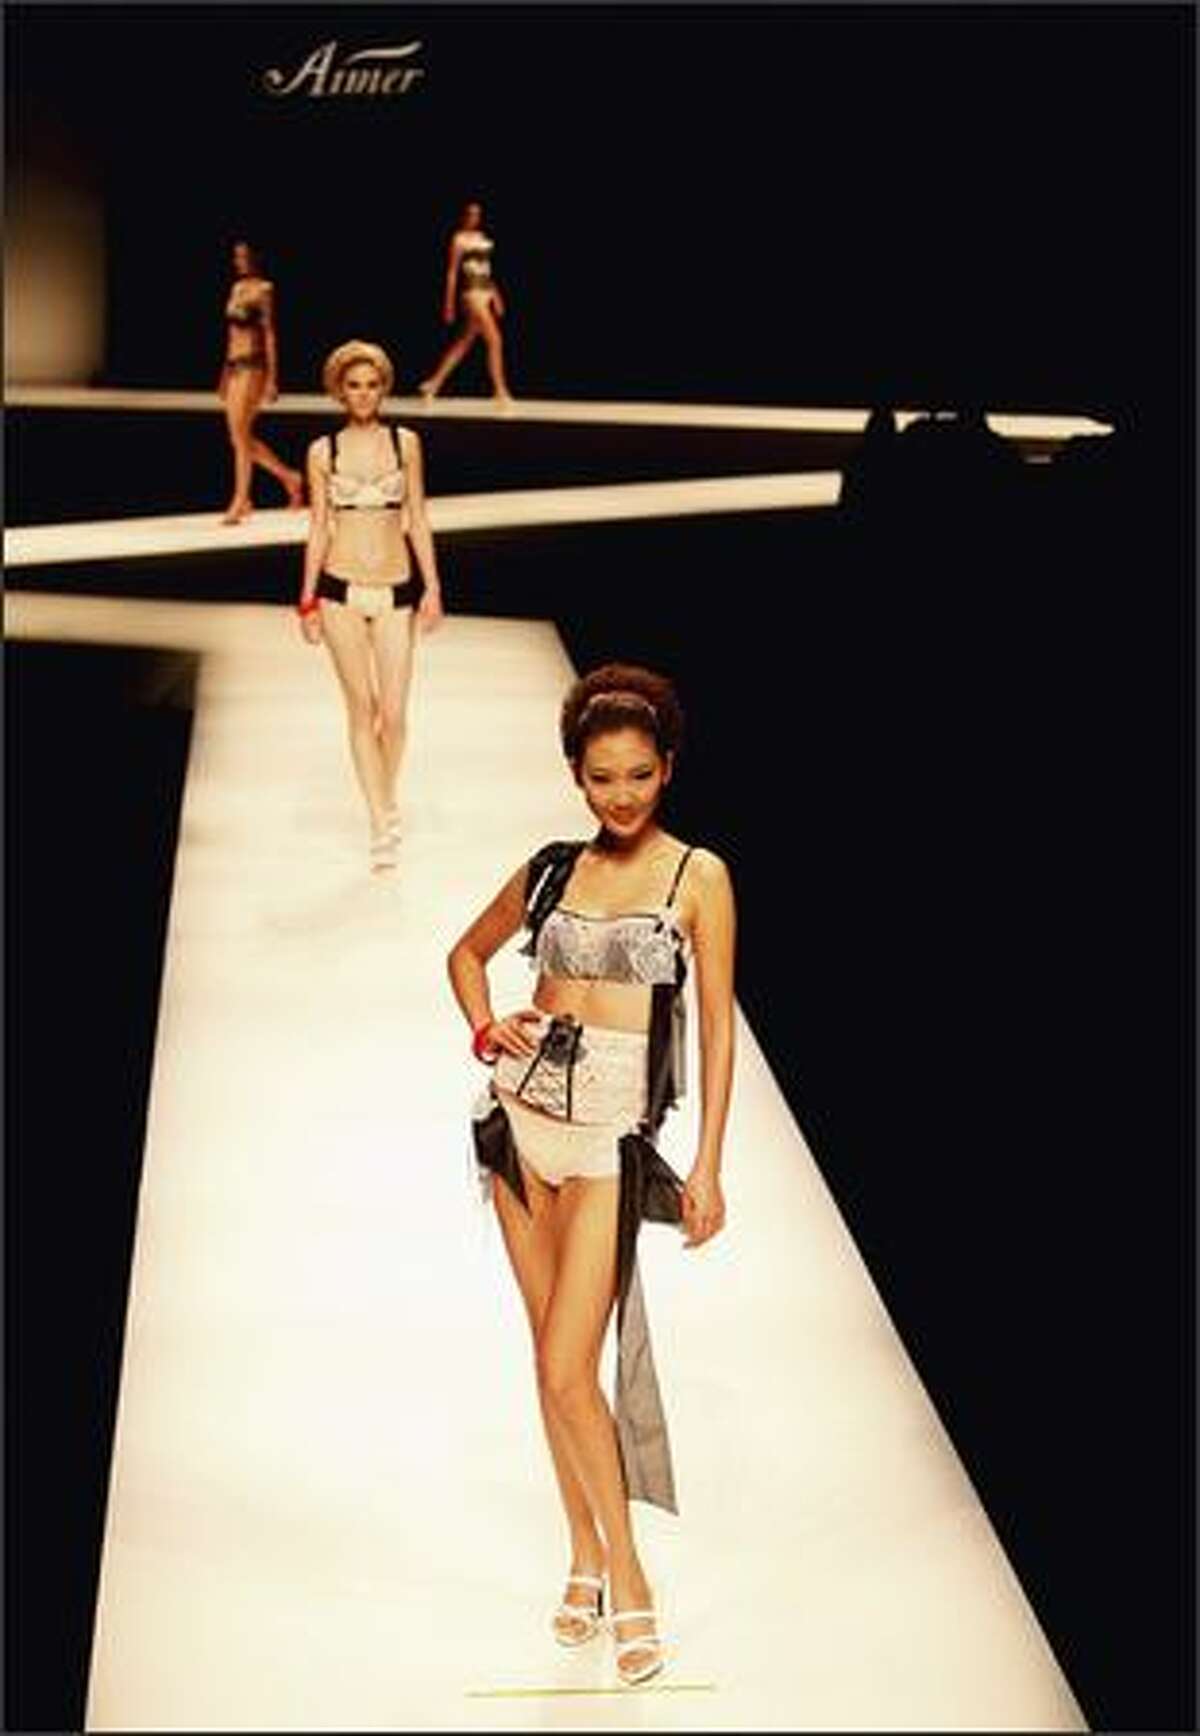 Models pose on the runway during the Aimer Lingerie Trends Release S/S 2009 at the China Fashion Week Spring/Summer Collection 2009 on Tuesday in Beijing, China.